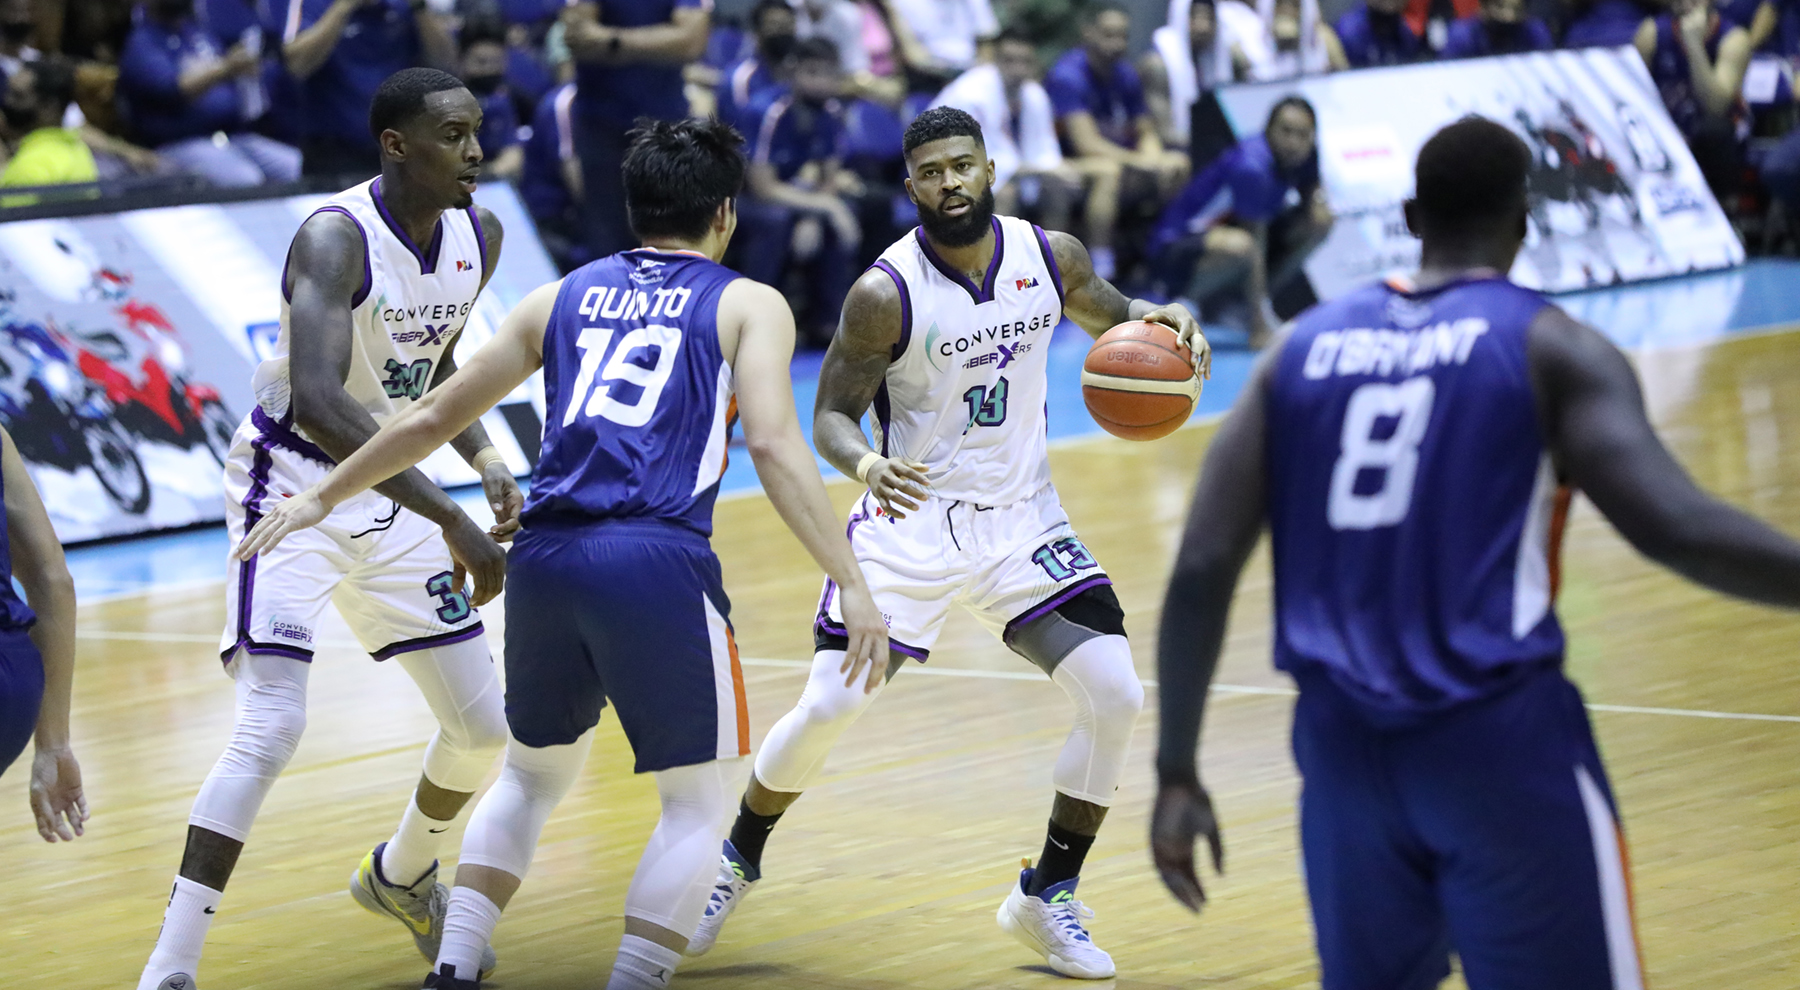 Converge's Maverick Ahanmisi in the PBA Commissioner's Cup.